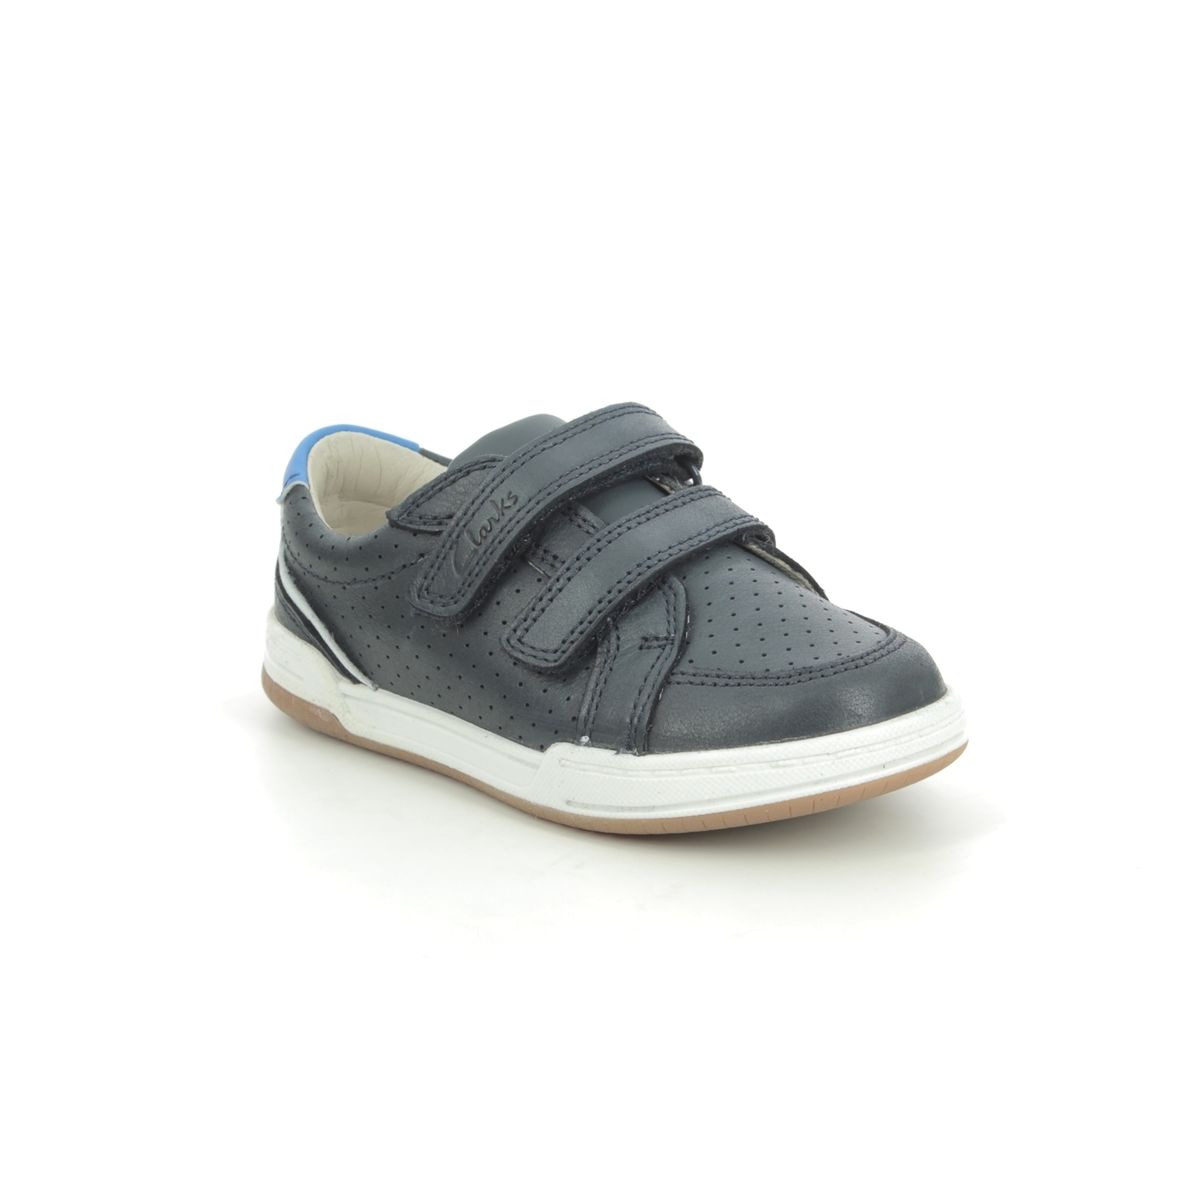 Clarks Fawn Solo T Navy Leather Kids Boys Toddler Shoes 589886F In Size 7 In Plain Navy Leather F Width Fitting Regular Fit For kids